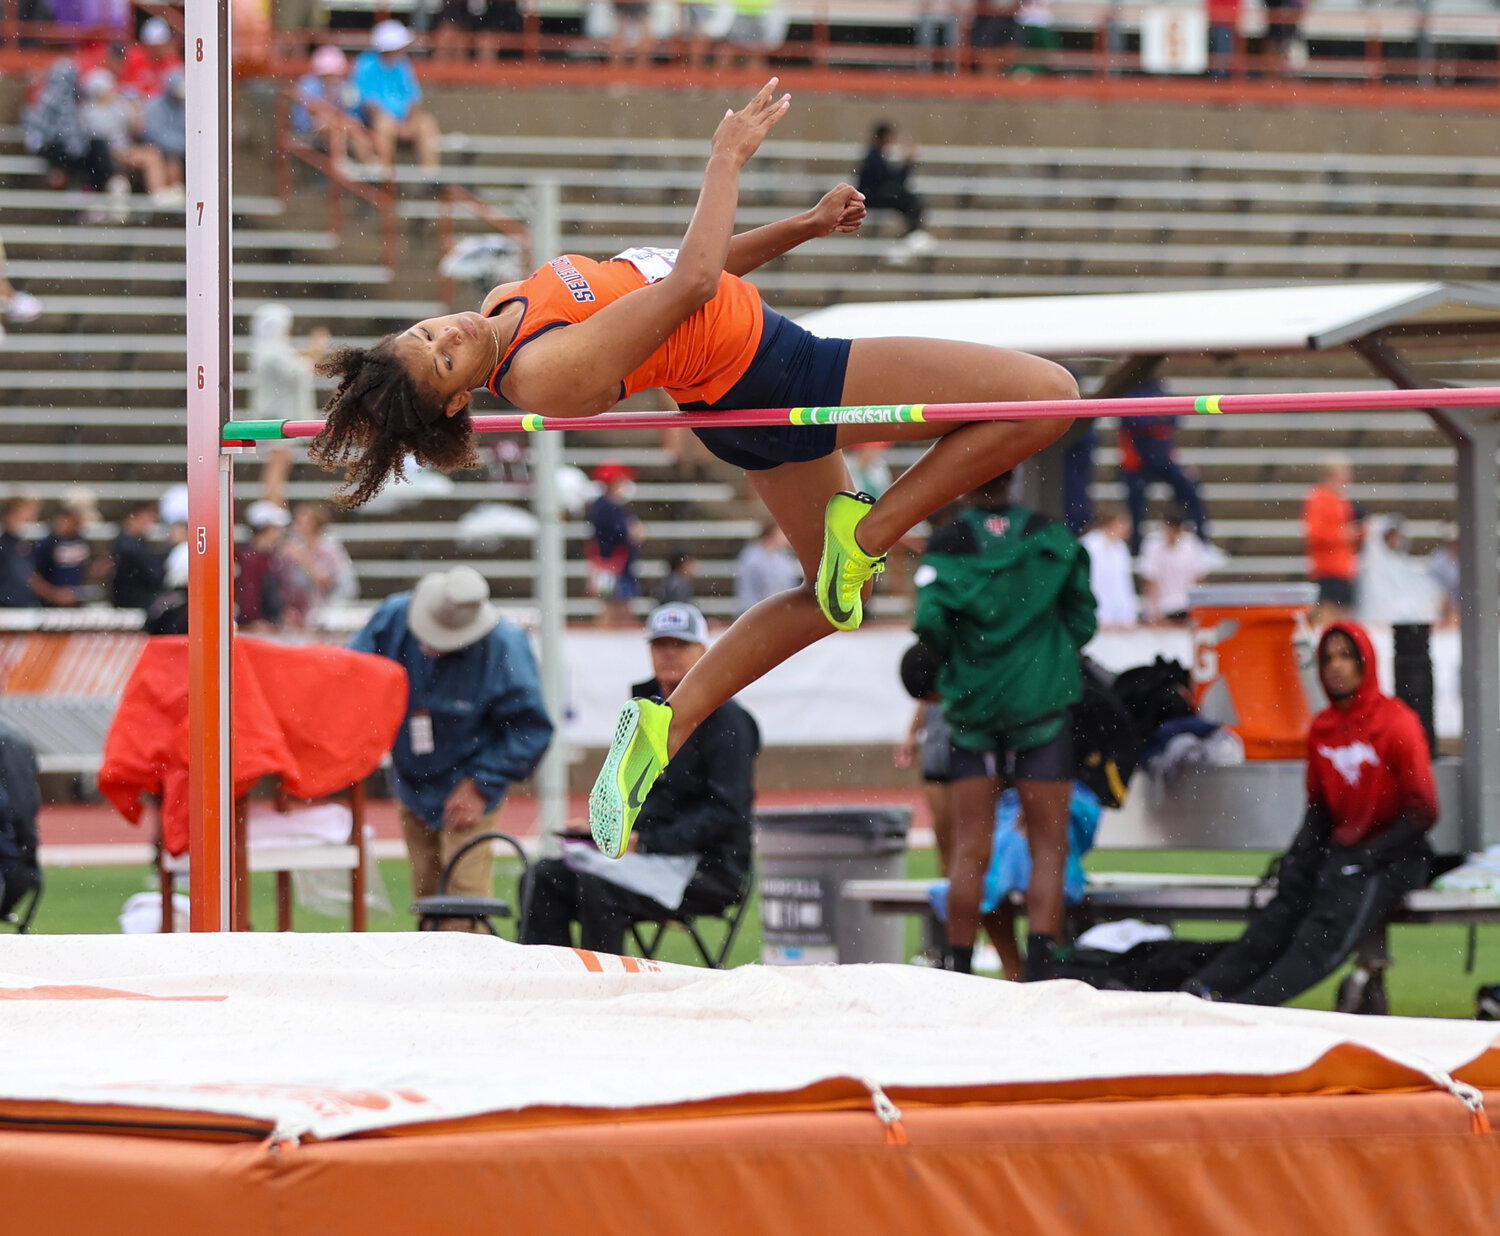 Madison Carlton of Seven Lakes High School (1631) competes in the Class 6A girls high jump during the UIL State Track and Field Meet on Saturday, May 13, 2023 in Austin.